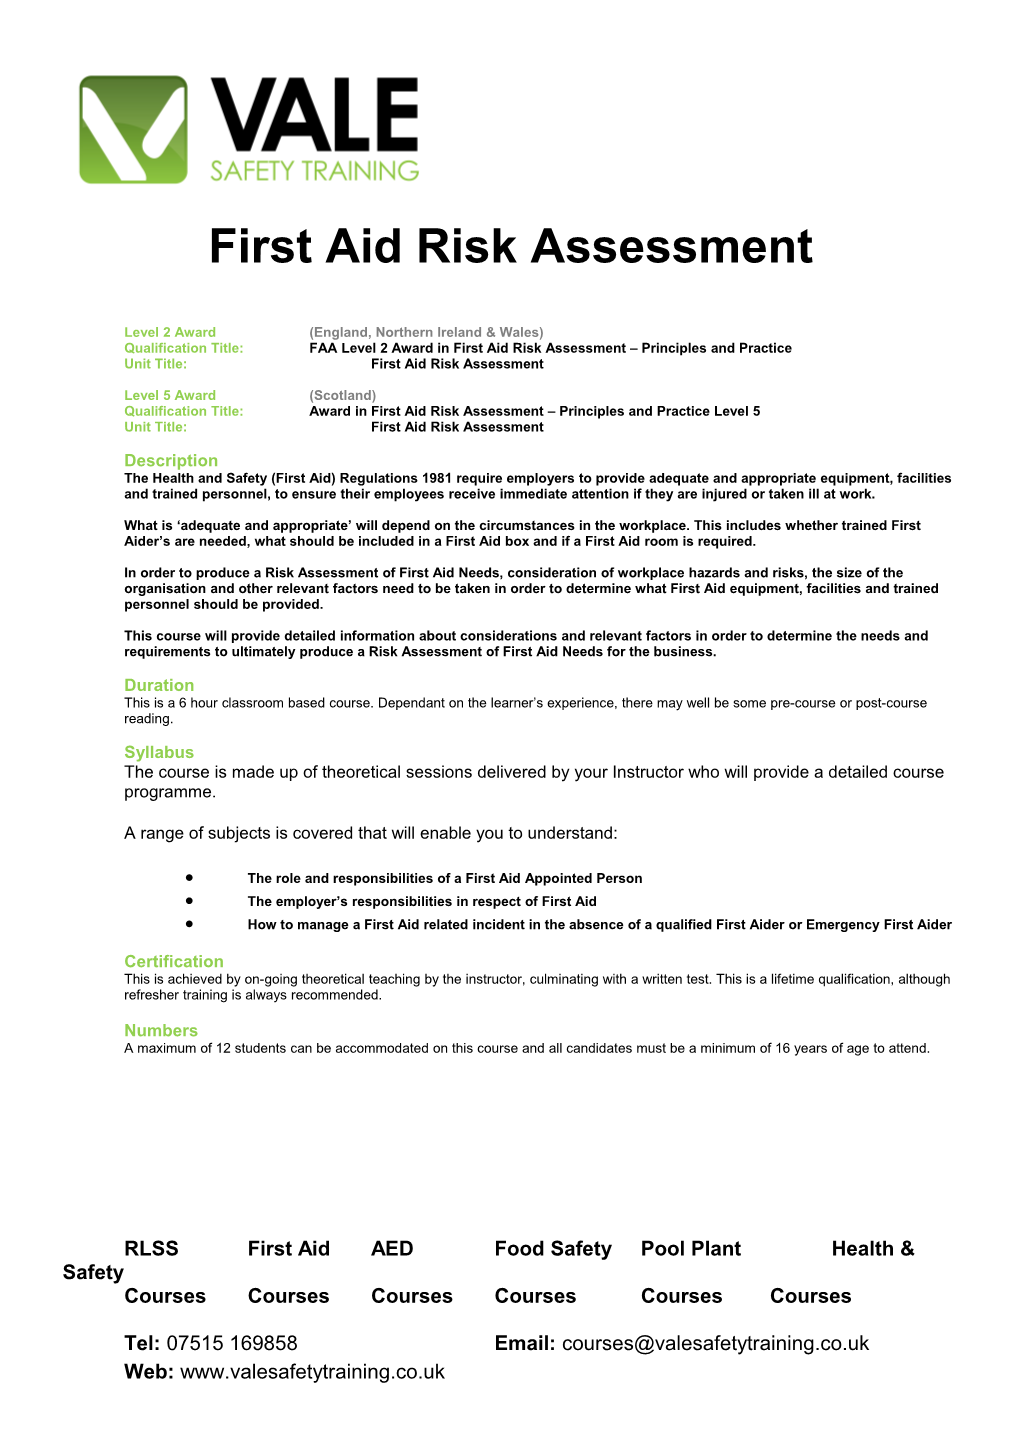 First Aid Risk Assessment